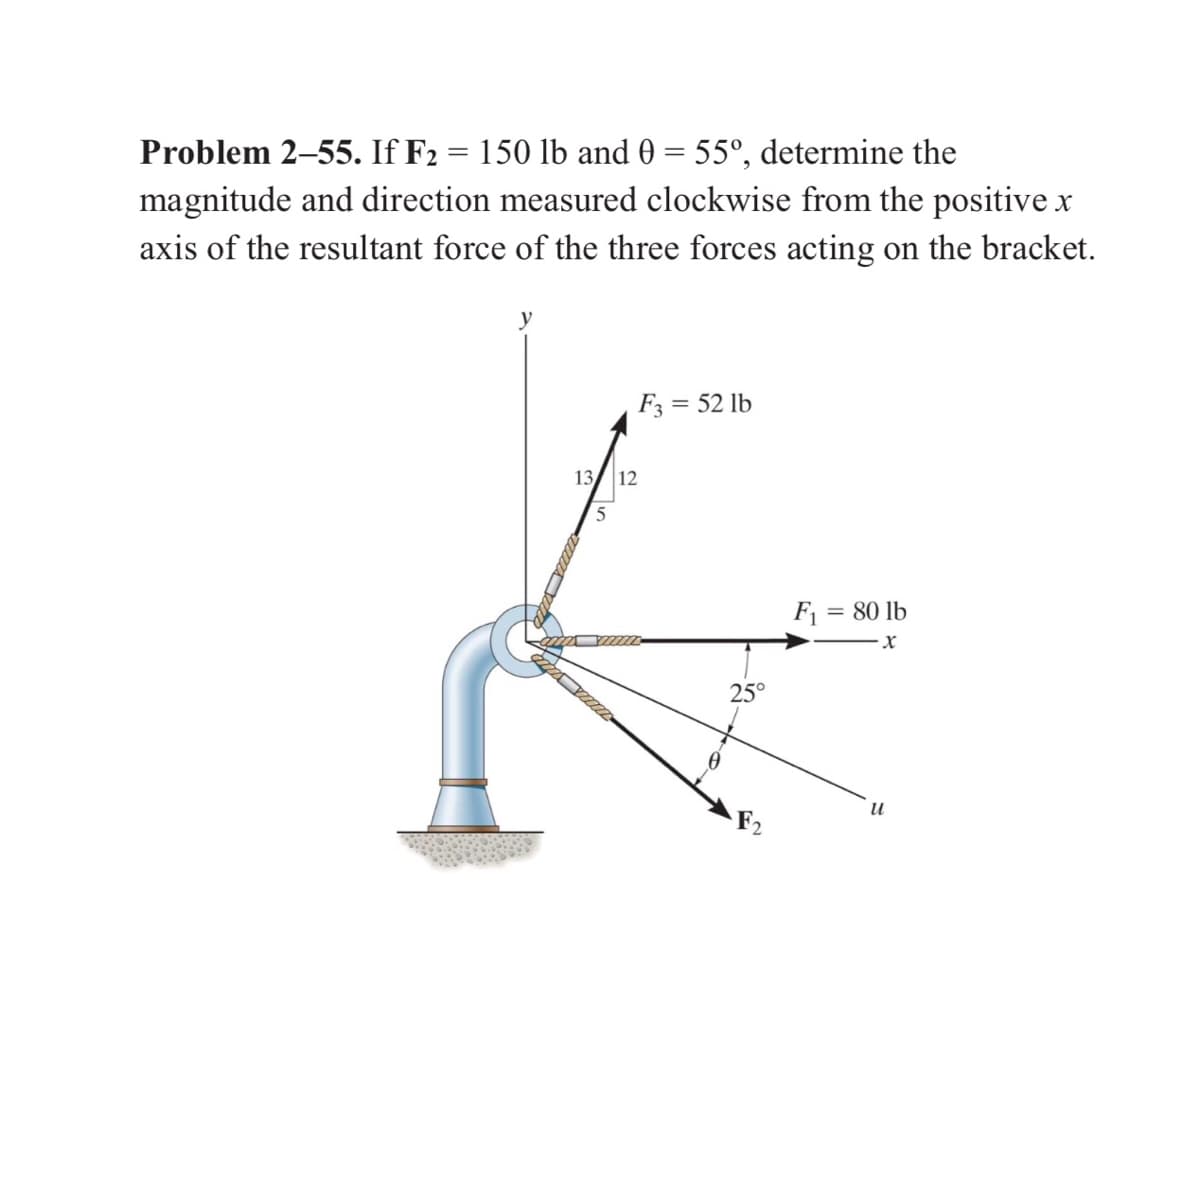 Problem 2–55. If F2 = 150 lb and 0 = 55°, determine the
magnitude and direction measured clockwise from the positive x
axis of the resultant force of the three forces acting on the bracket.
F3 = 52 lb
13/ 12
F1 = 80 lb
25°
